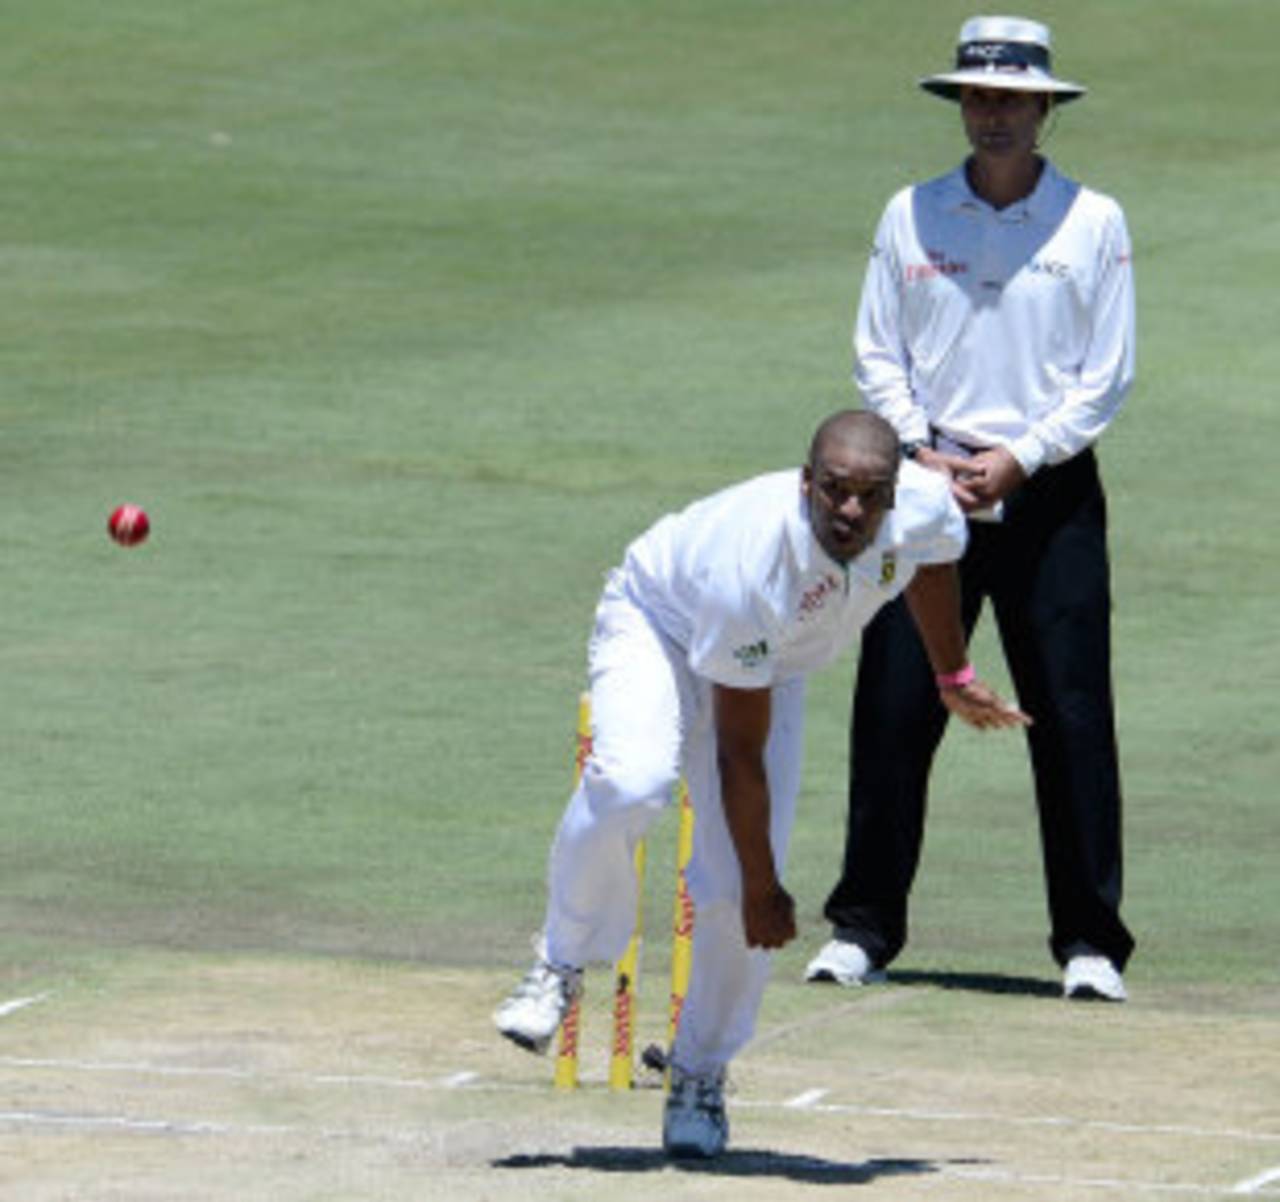 Vernon Philander has been terrific at Newlands, taking 30 wickets in four Tests, including a match haul of 8 for 78 against Australia in 2011&nbsp;&nbsp;&bull;&nbsp;&nbsp;AFP